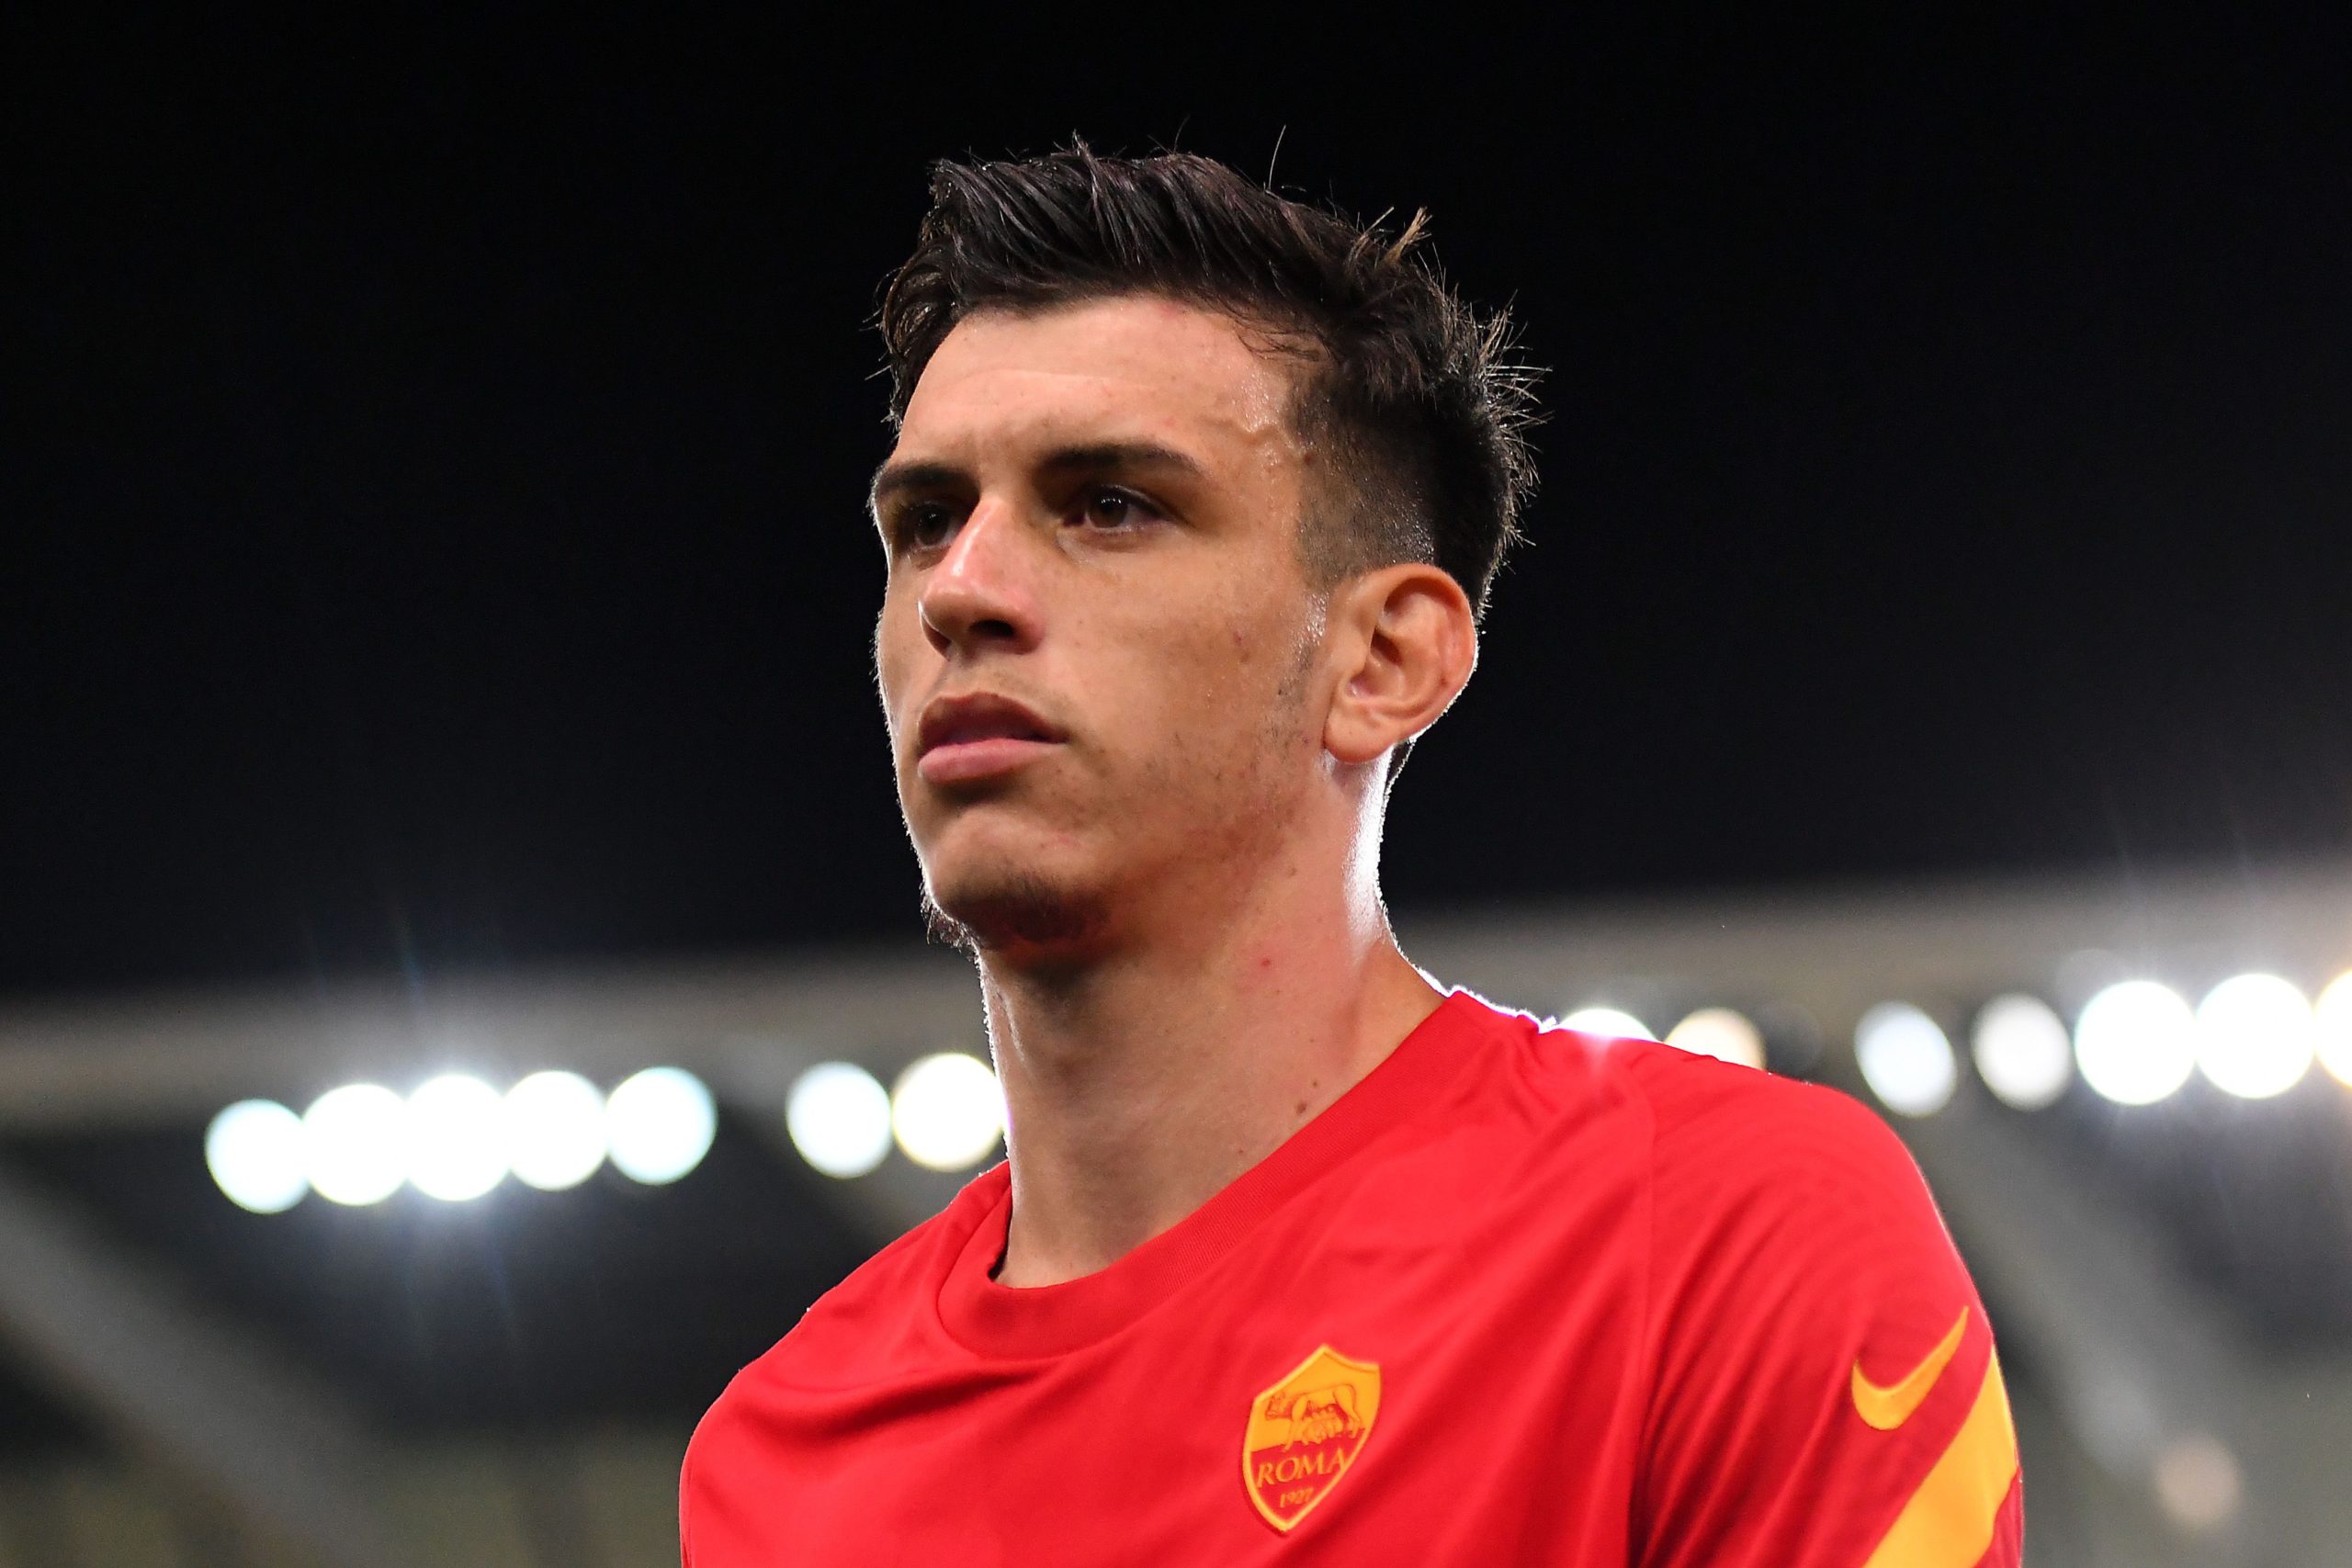 Nottingham Forest reportedly intend to make a lucrative offer for Roger Ibanez, whom Roma made available since they already signed two center-backs.